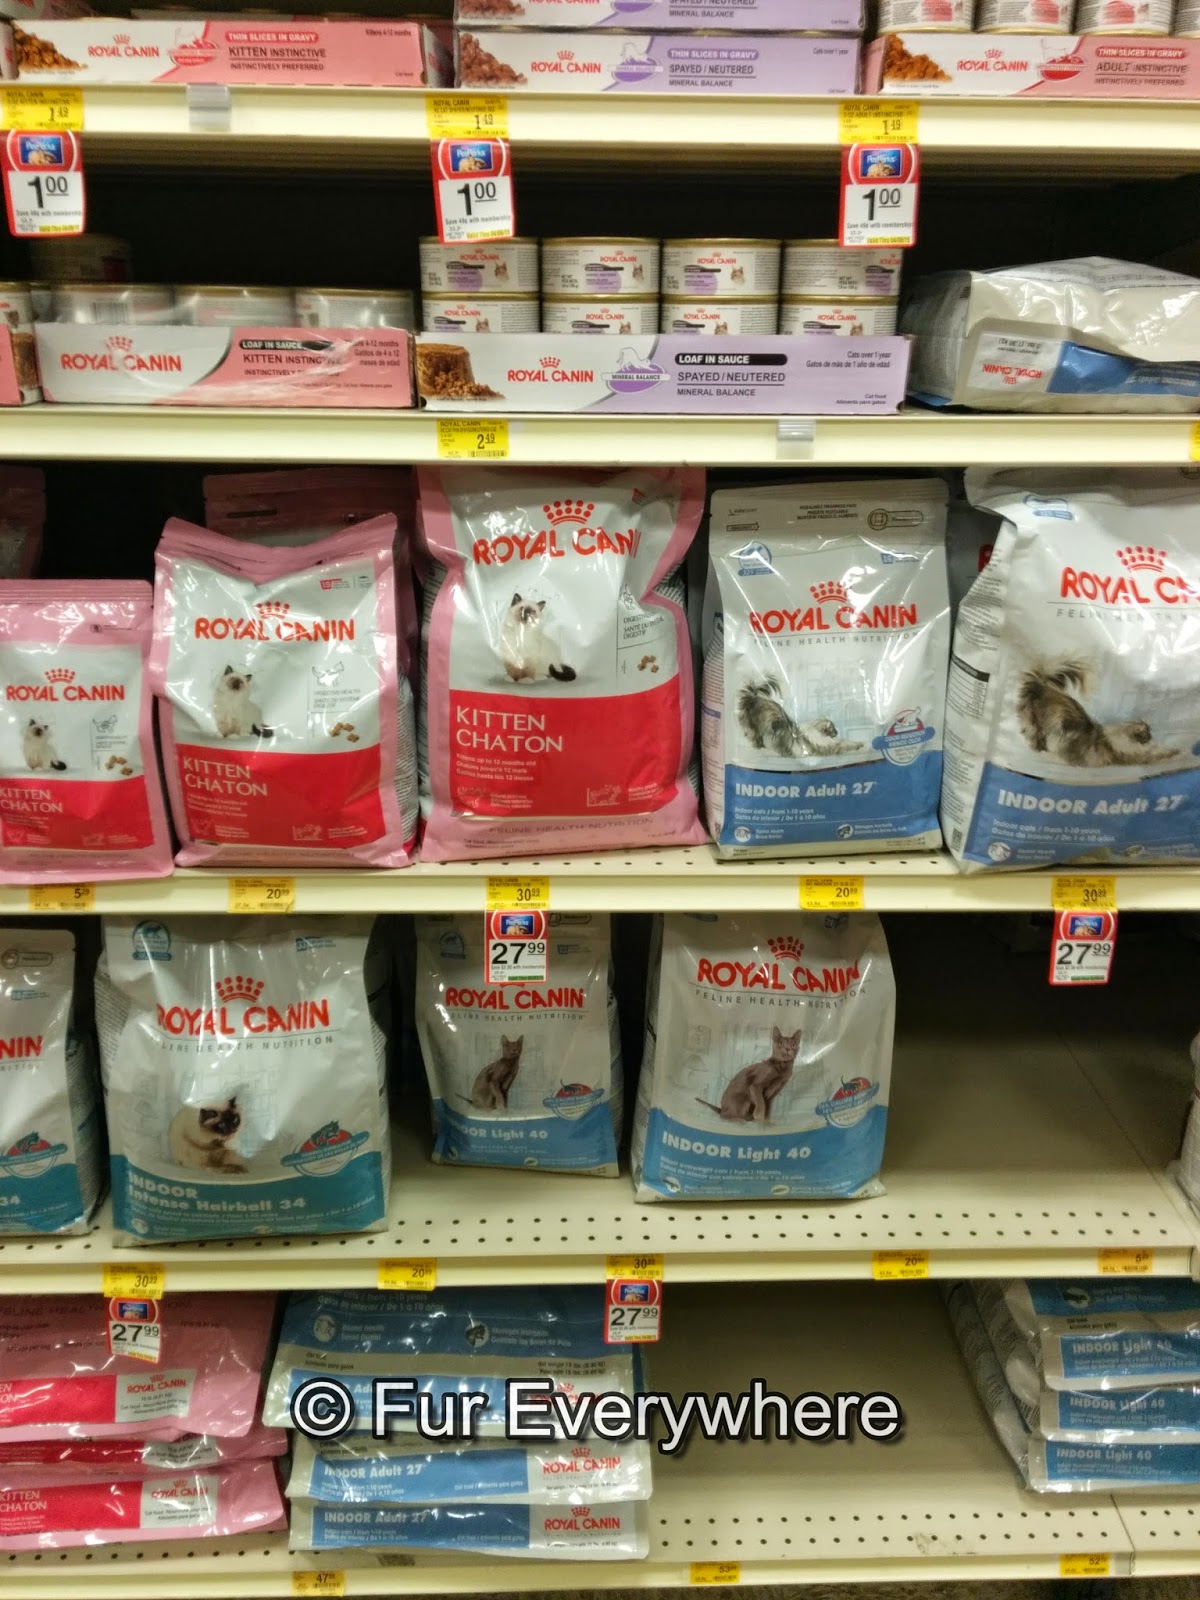 Royal Canin dry and wet cat food on PetSmart store shelf